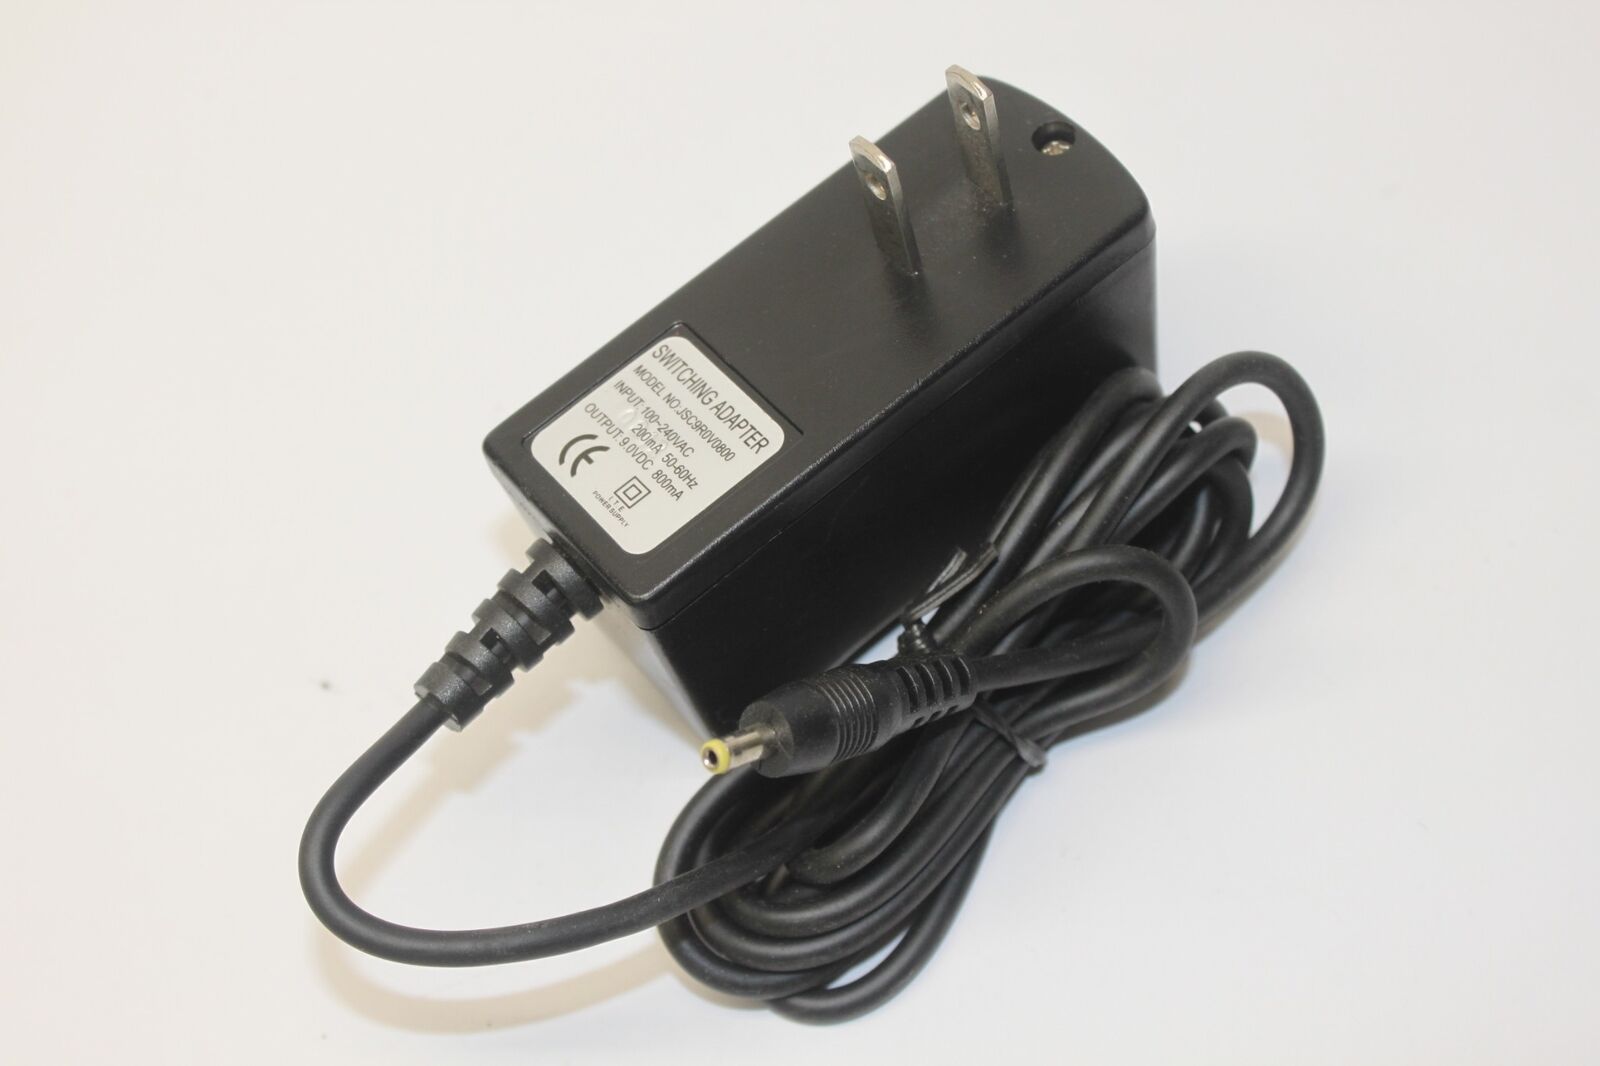 New 9V 800mA JSC9R0V0800 Switching Power Supply Ac Adapter - Click Image to Close